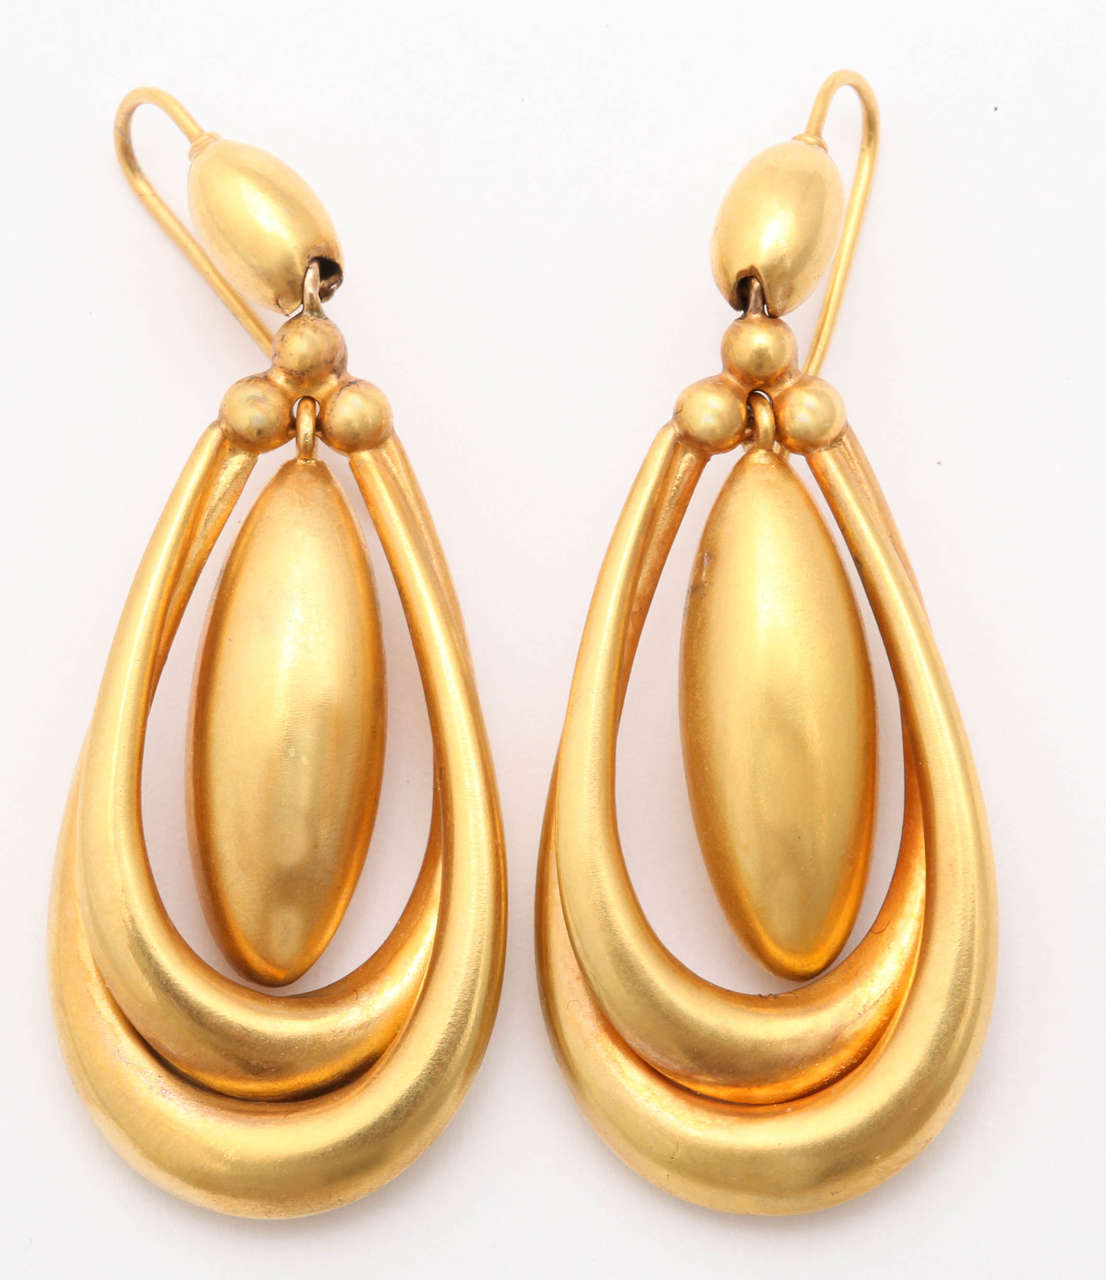 Golden Earrings of  15kt are always elegant, always wearable and always lighten the features. In this pair, the outer double hoops float a sizable center oval that hangs freely and will move with your movement  when you declare yay or nay, bringing